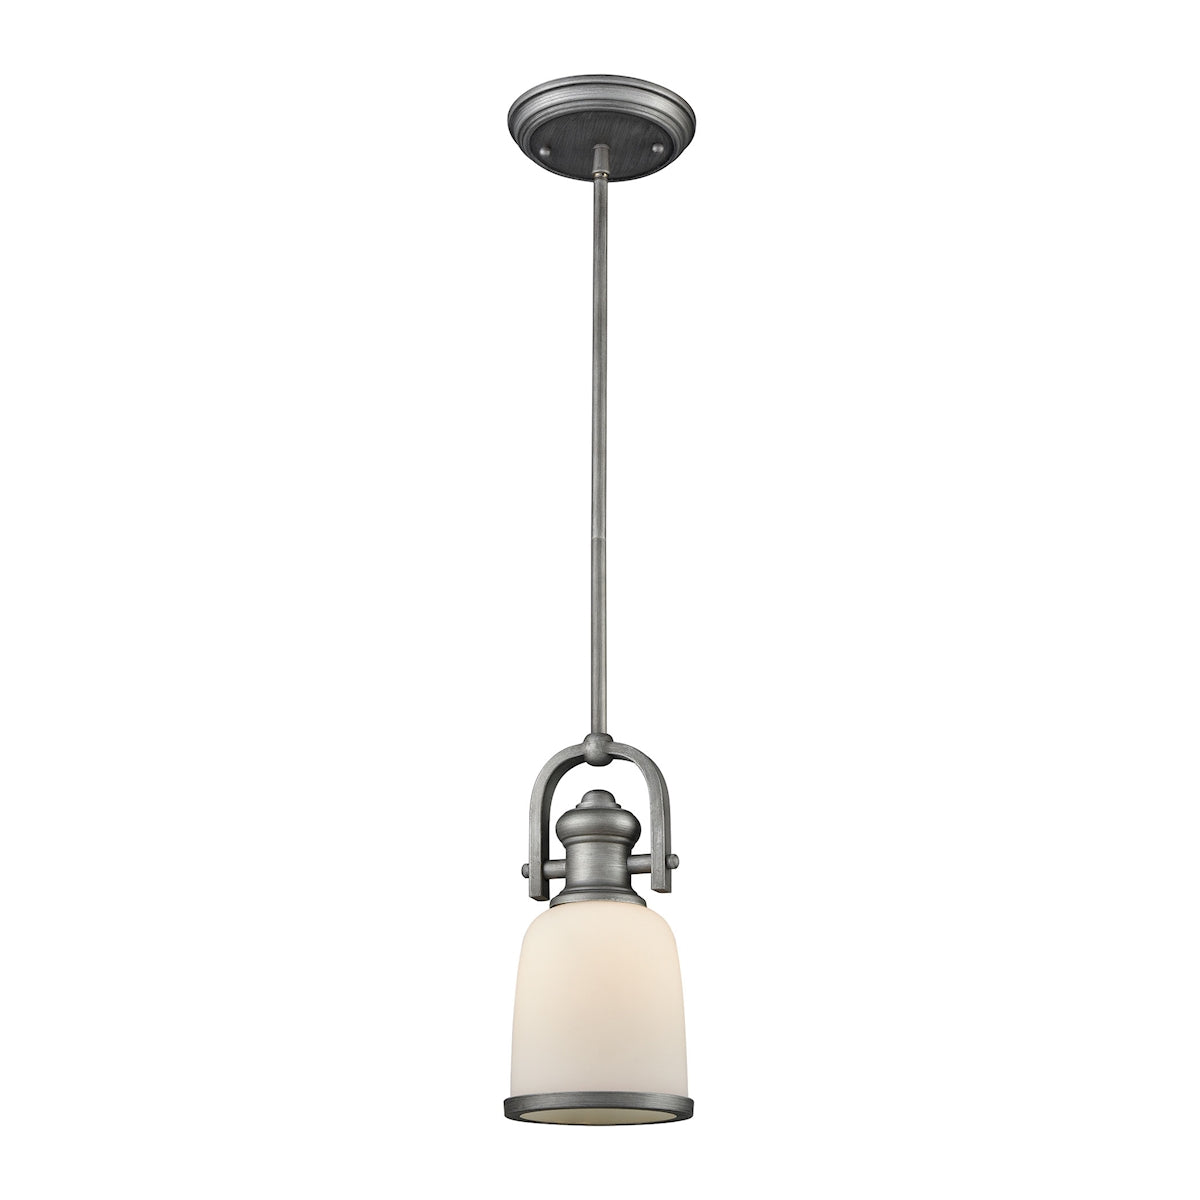 ELK Lighting 66681-1 Brooksdale 1-Light Mini Pendant in Weathered Zinc with White Glass